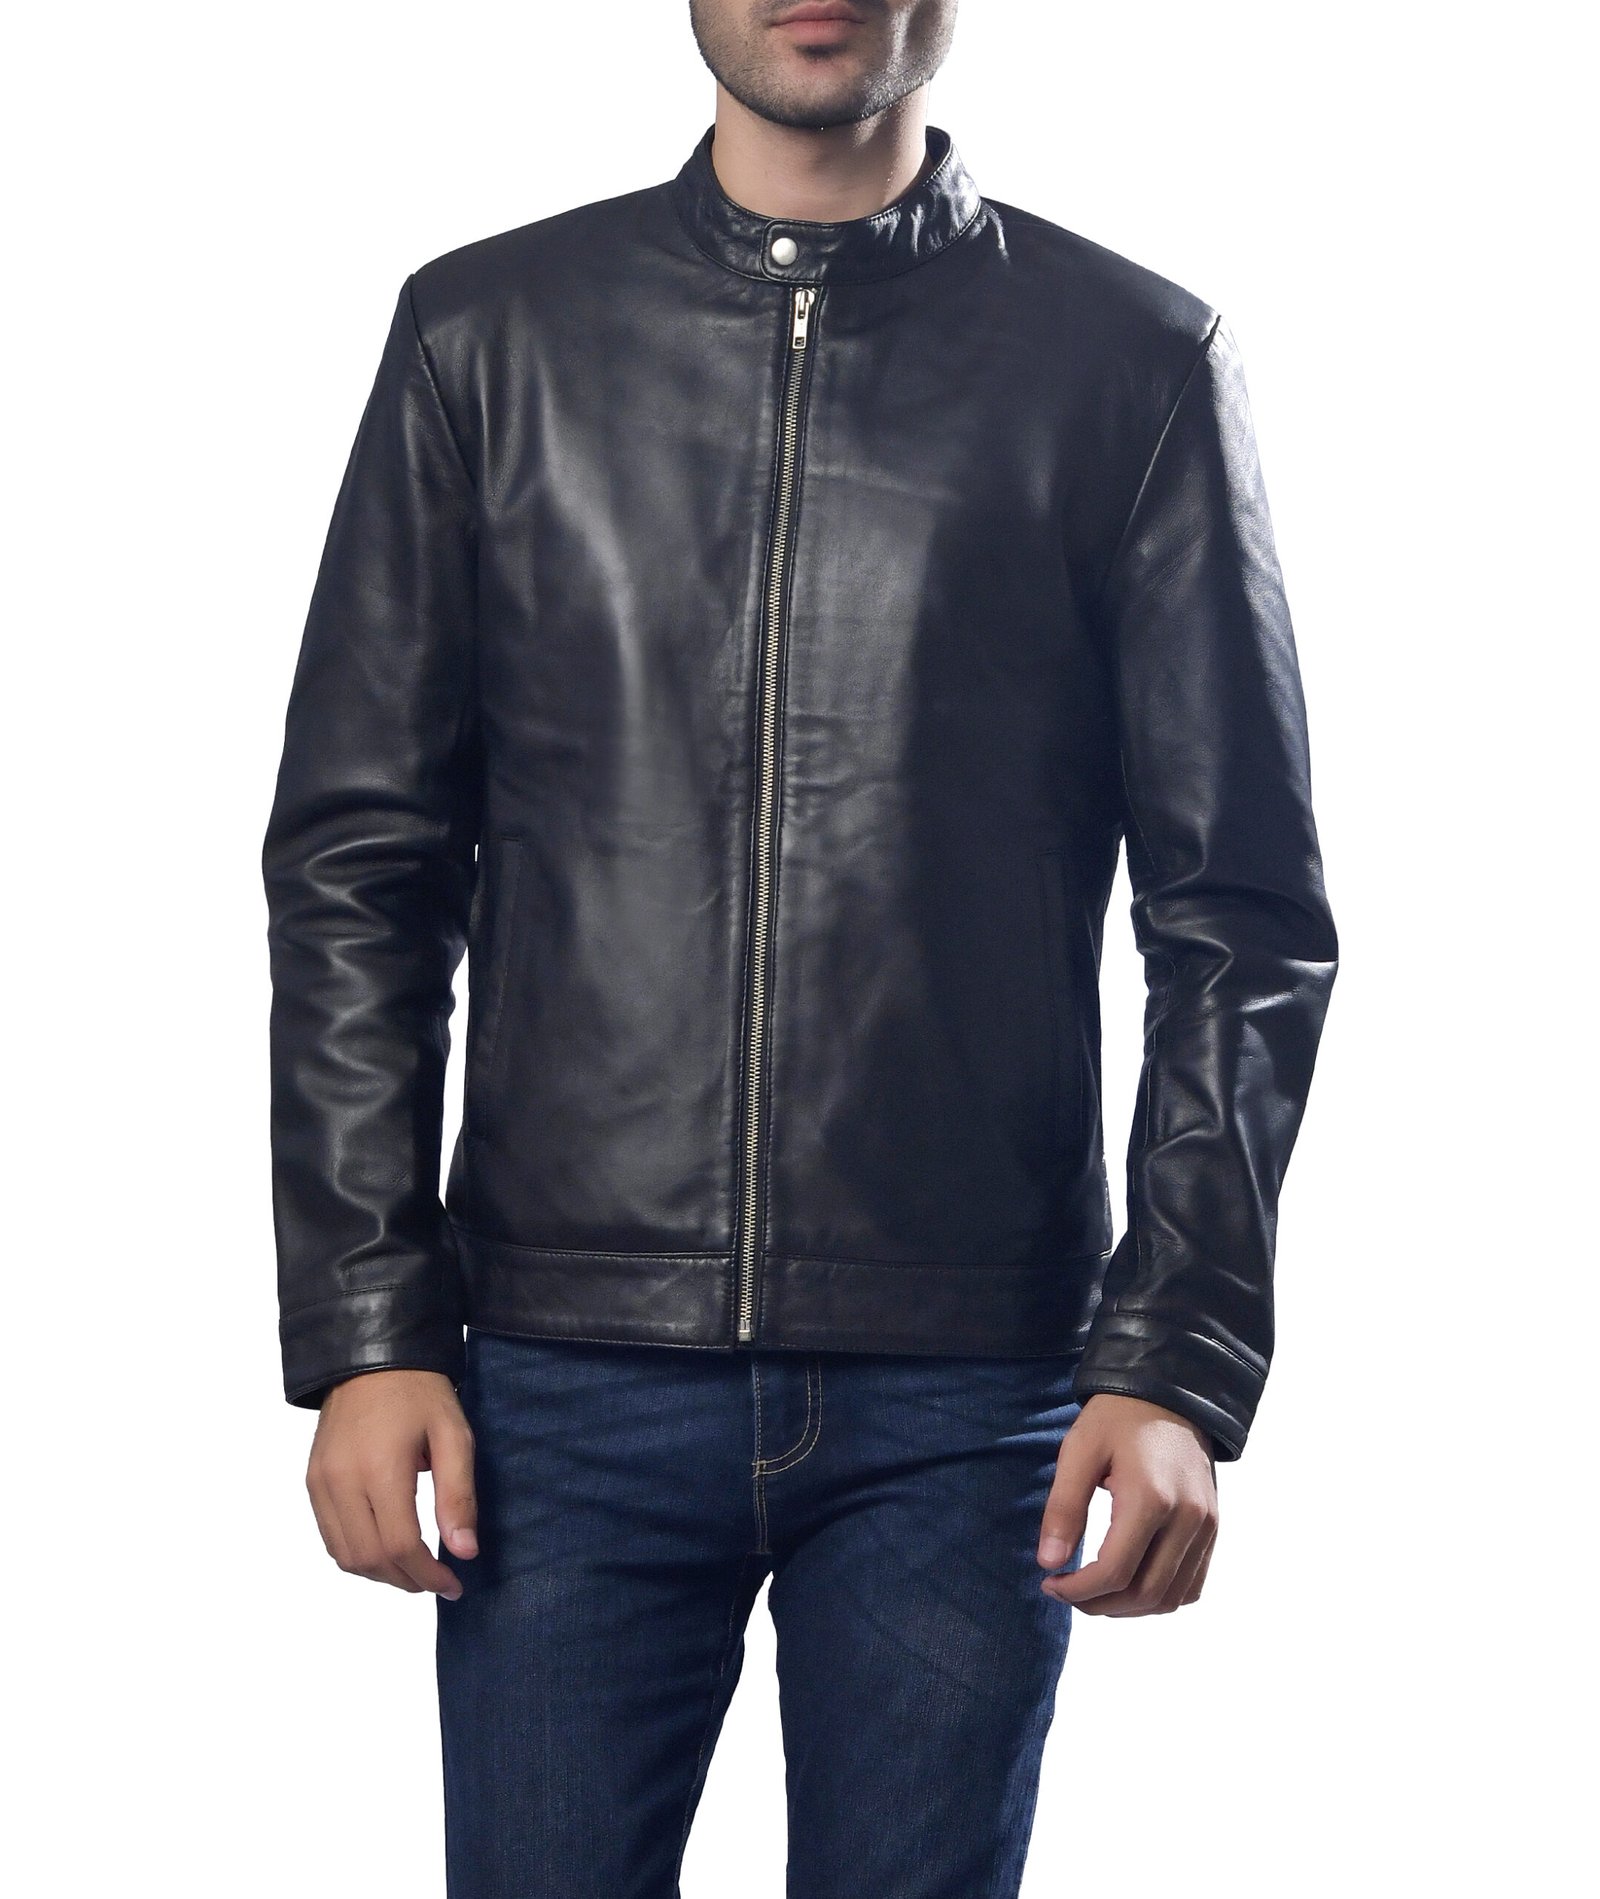 Racer Leather Jacket | Best Quality Genuine Leather Jackets for Men and ...